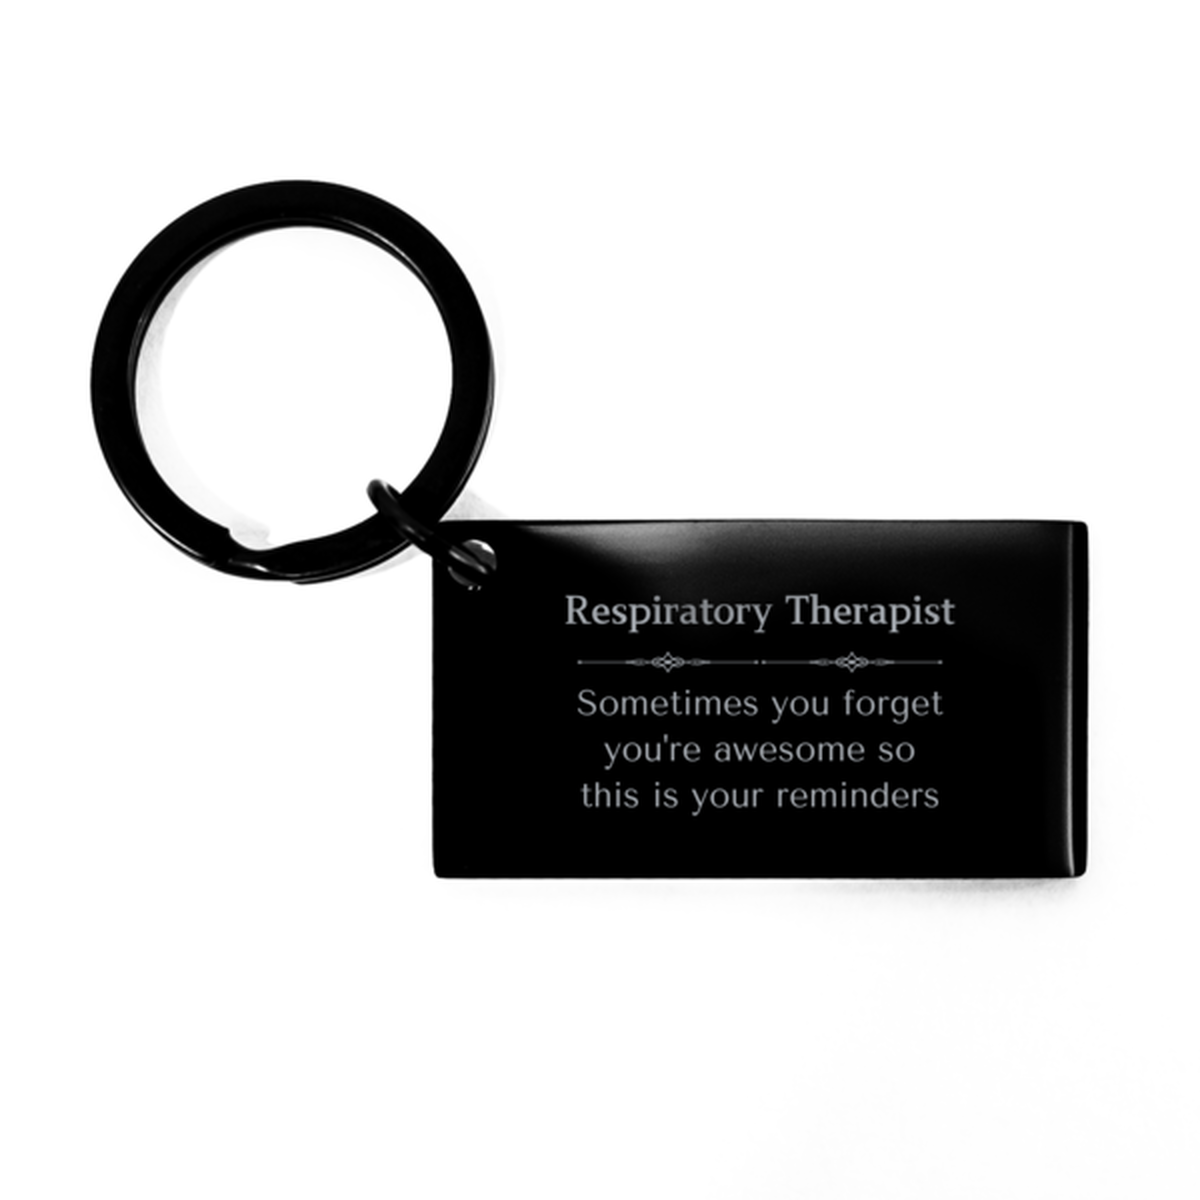 Sentimental Respiratory Therapist Keychain, Teller Sometimes you forget you're awesome so this is your reminders, Graduation Christmas Birthday Gifts for Respiratory Therapist, Men, Women, Coworkers